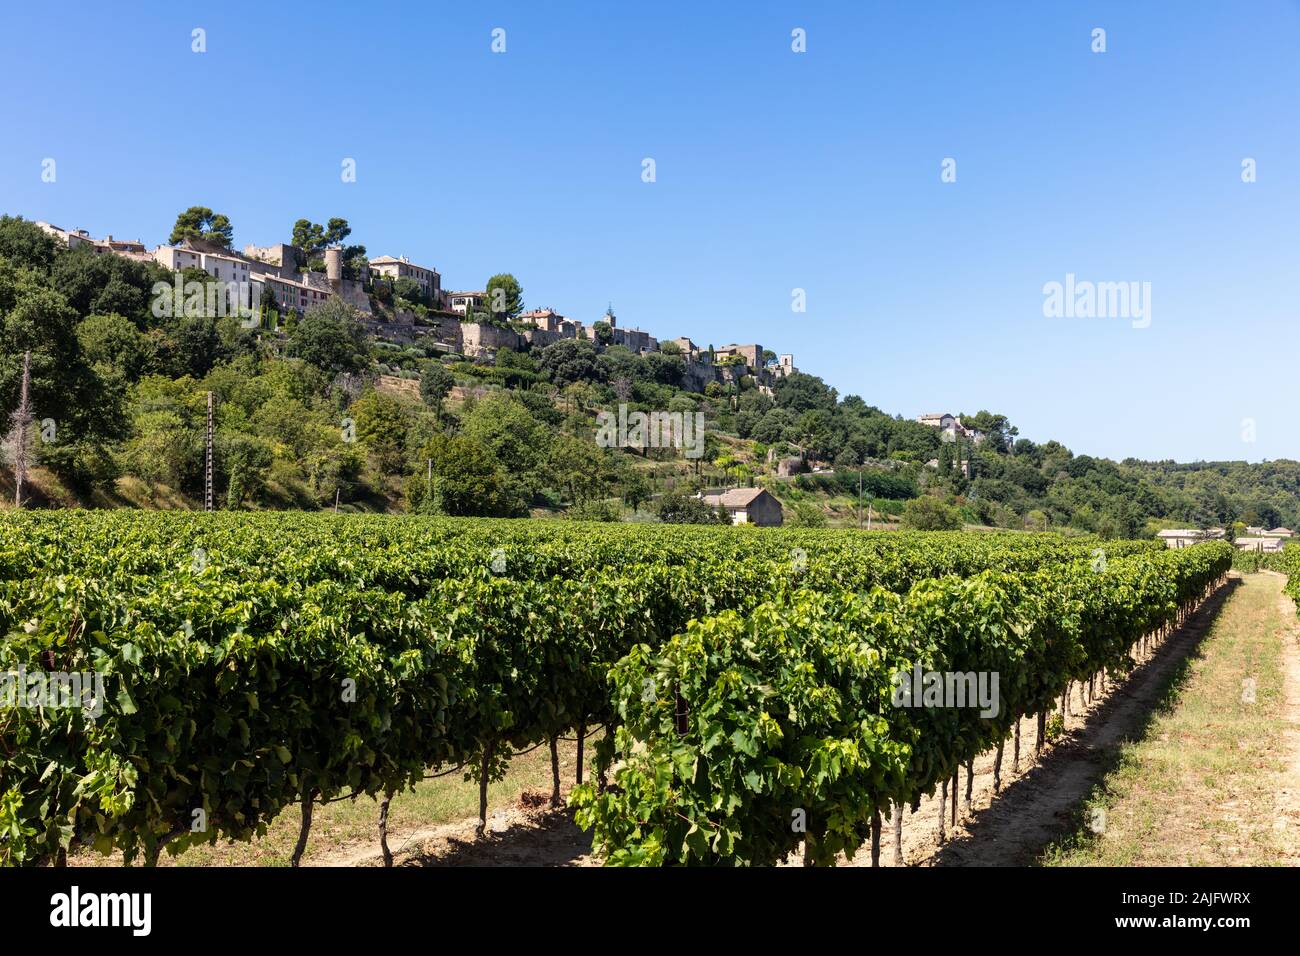 View of a typical French village and vinyard in the Luberon, Provence, Southern France Stock Photo